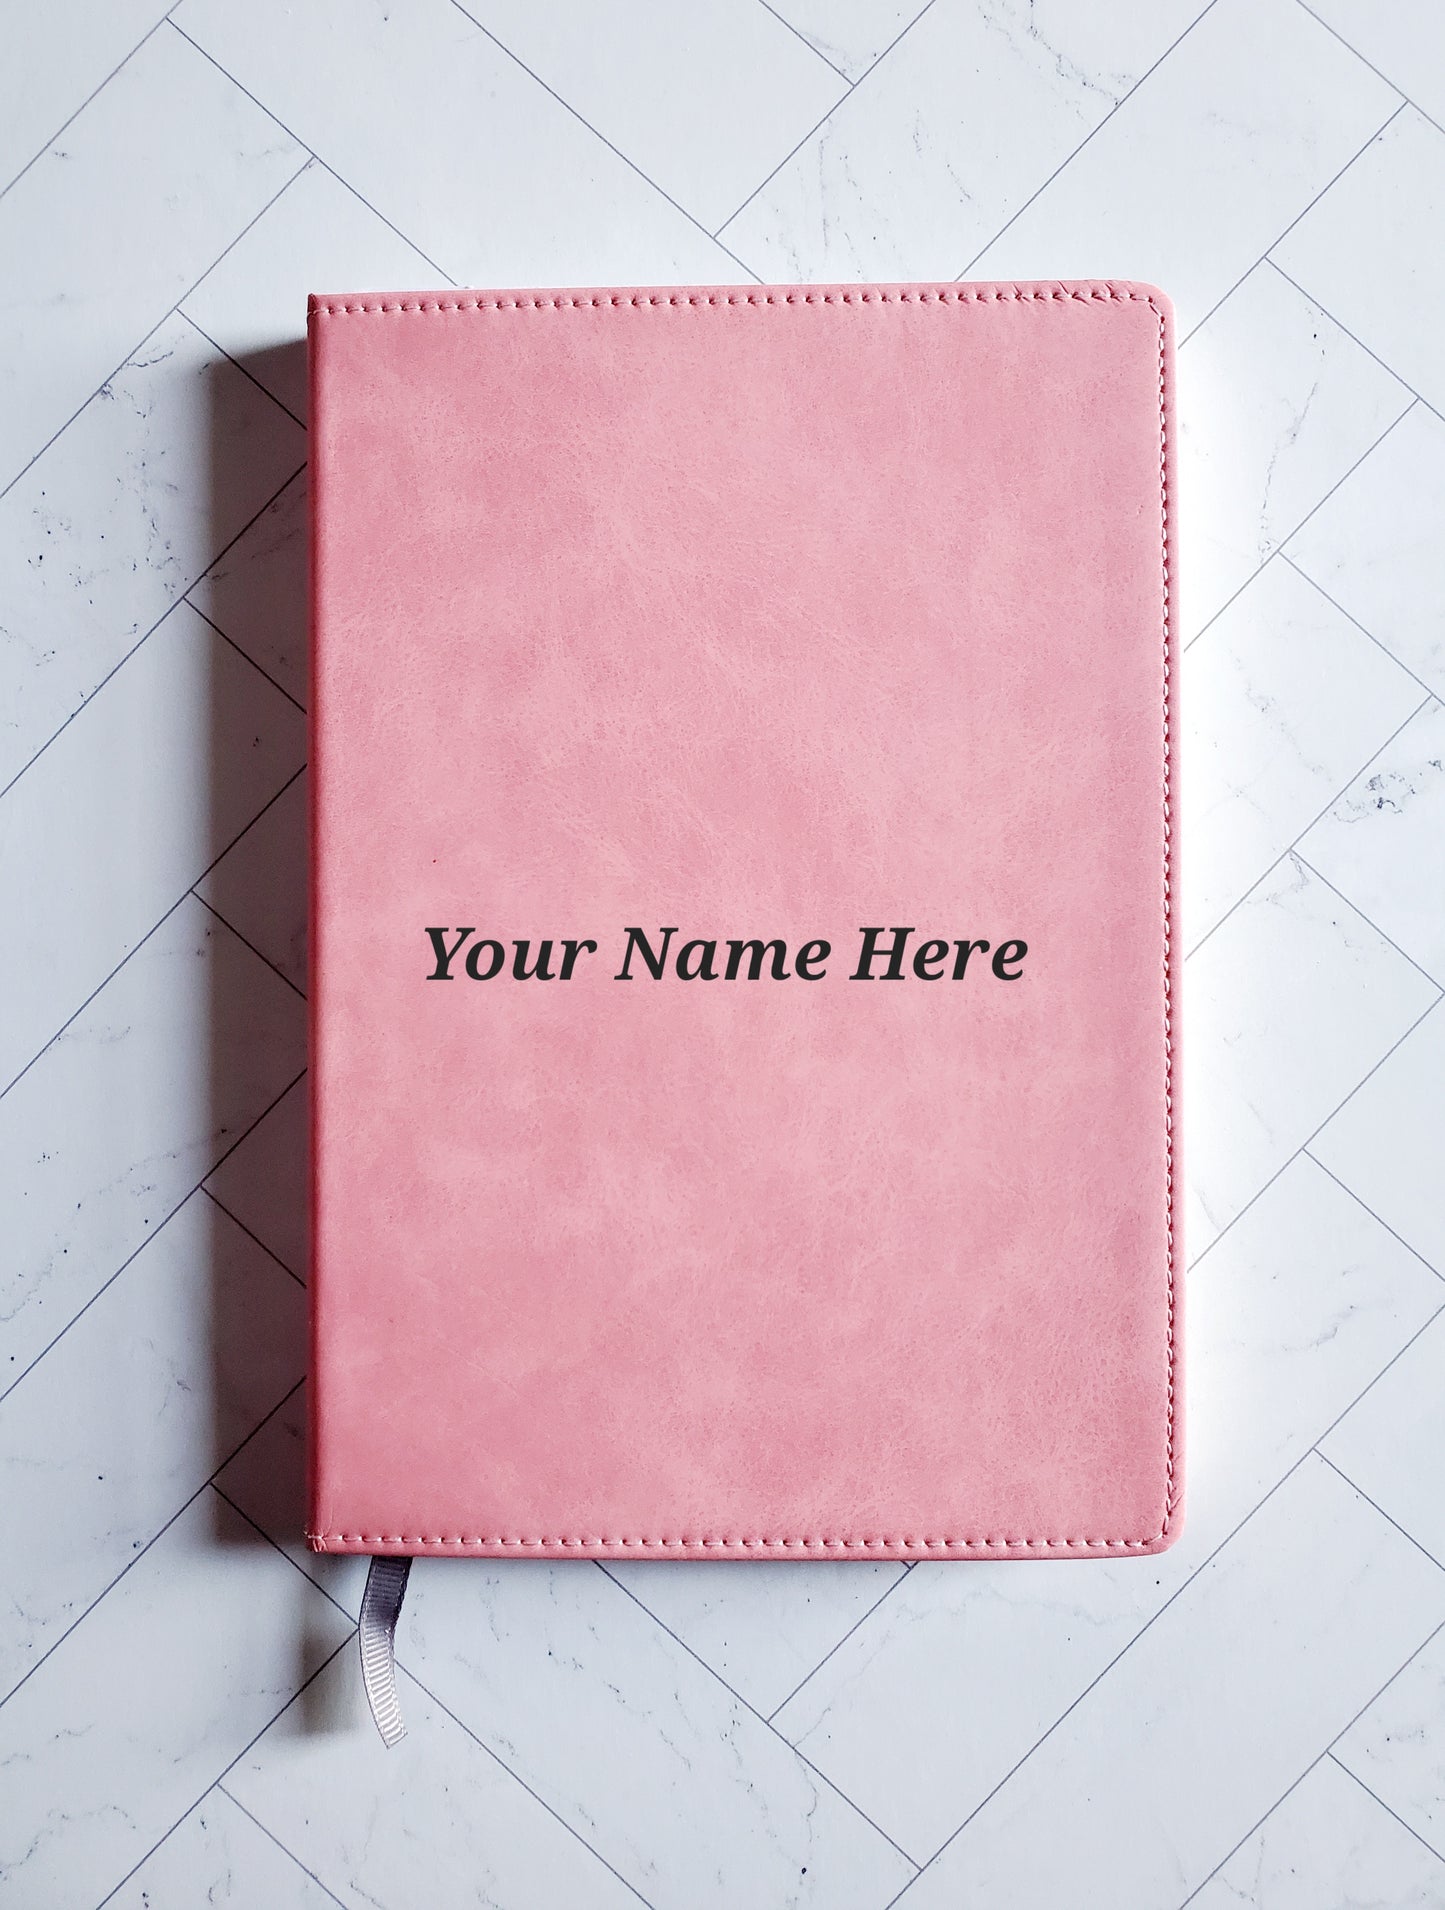 Gifts & Accessories - Personal Journal